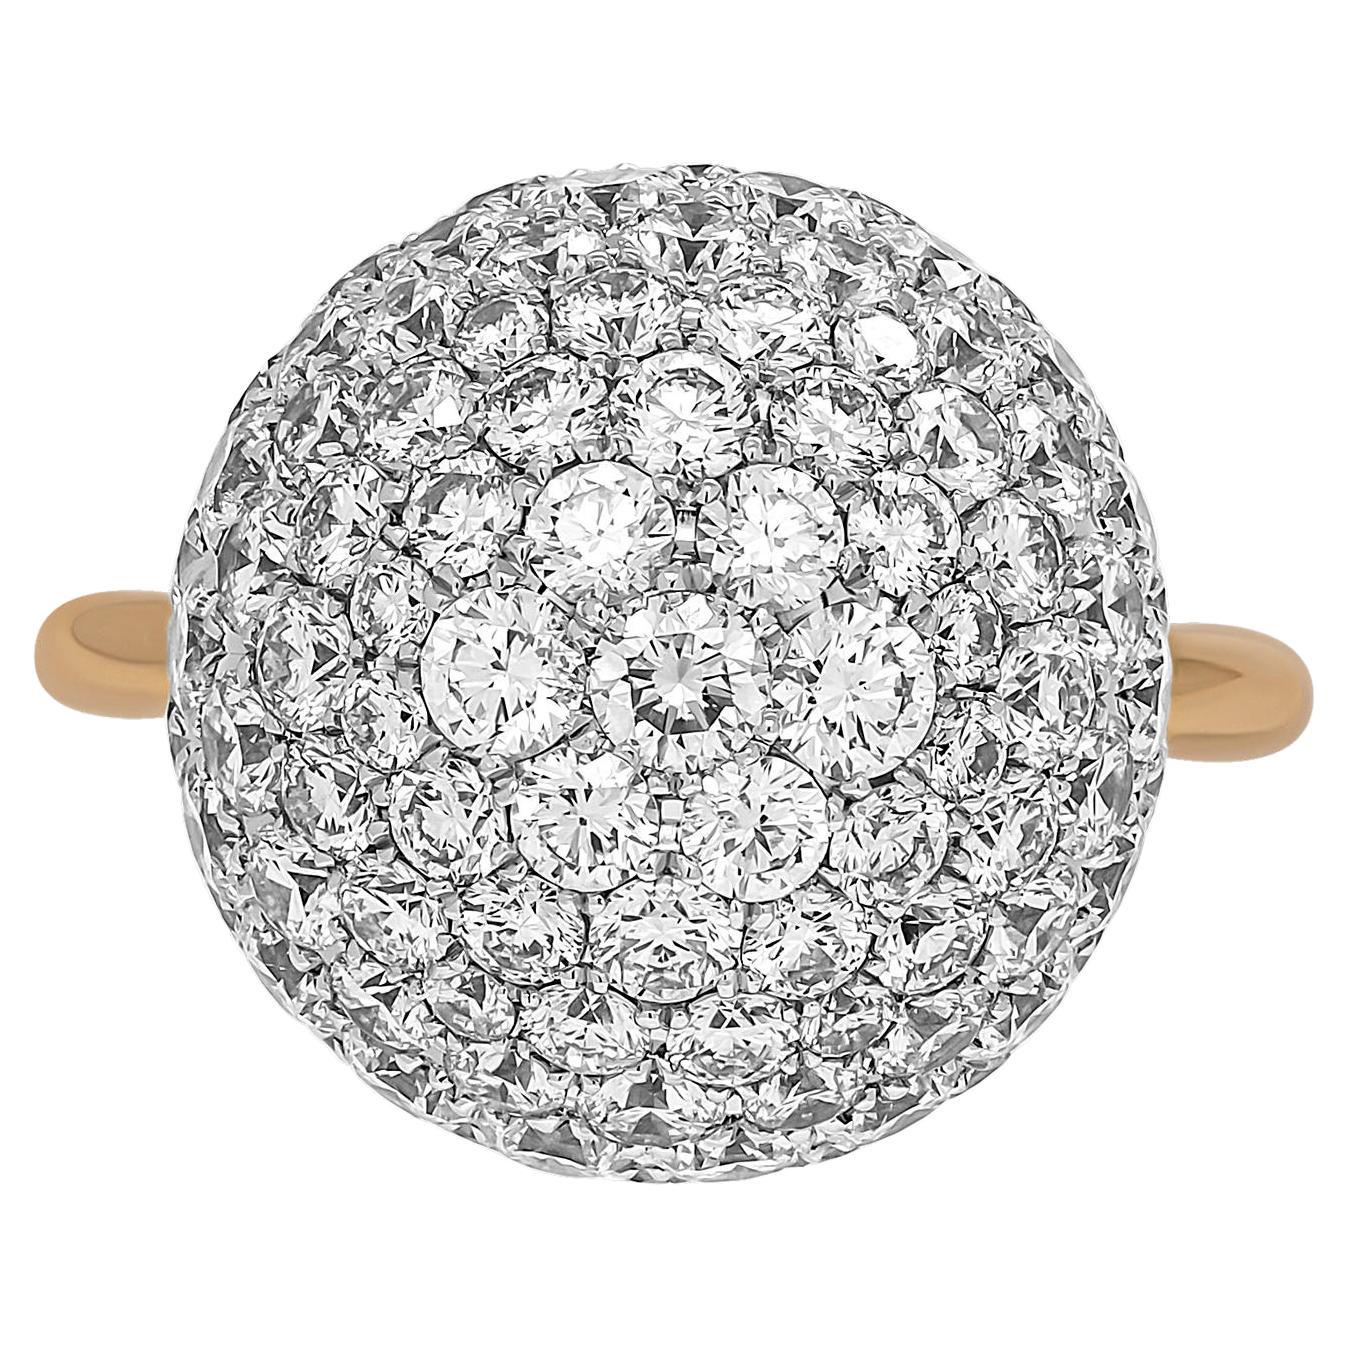 Ball ring in 18K Yellow & White Gold
With full cut natural white round diamonds
Total Carat Weight: 5.72ct
Size: 4.25 (can be sized)